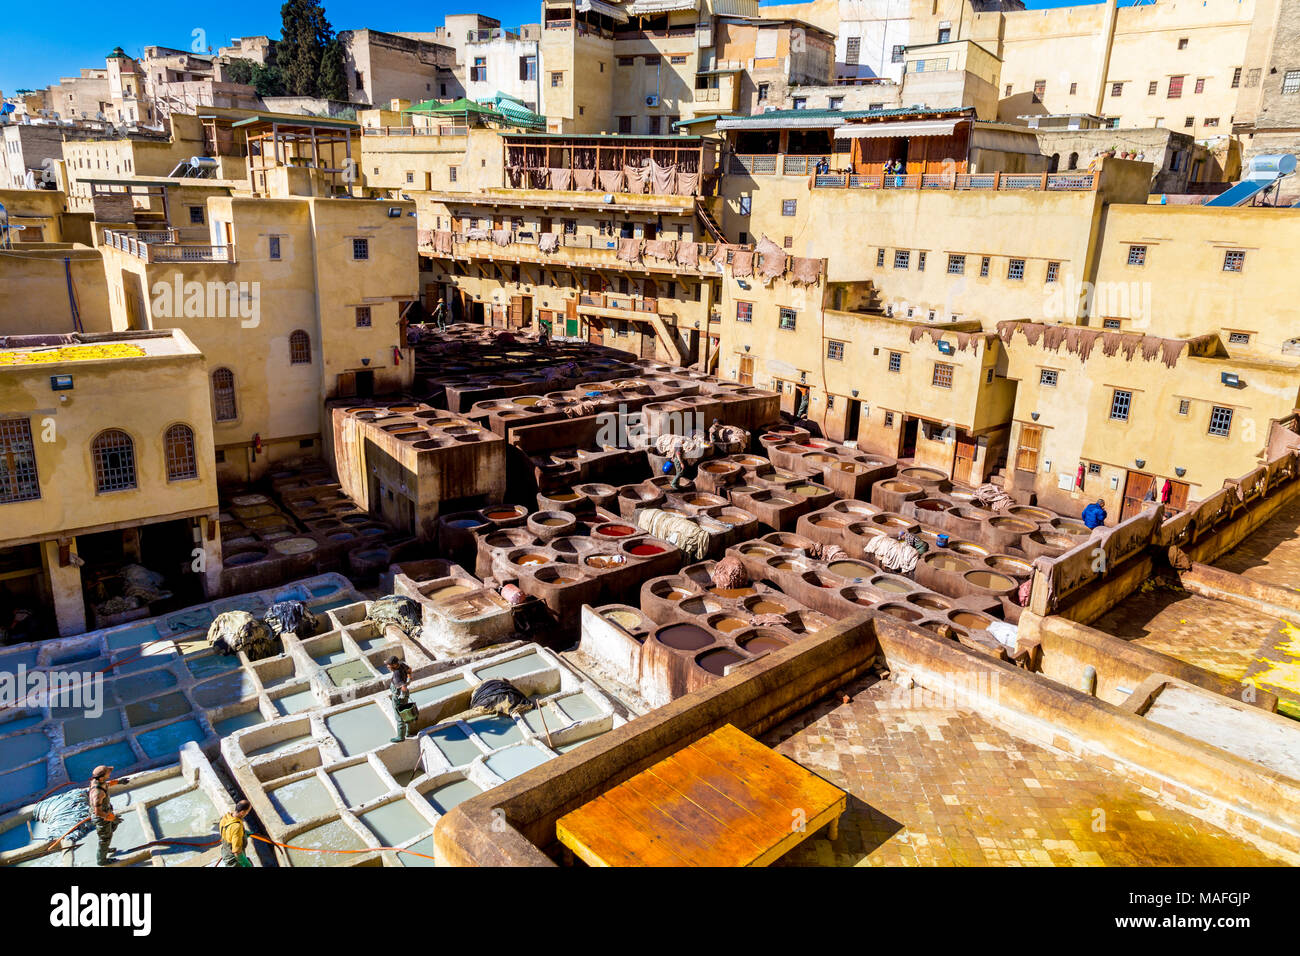 Craftsmen dyeing leather at Chaouwara tanneries in Fez, Morocco Stock Photo